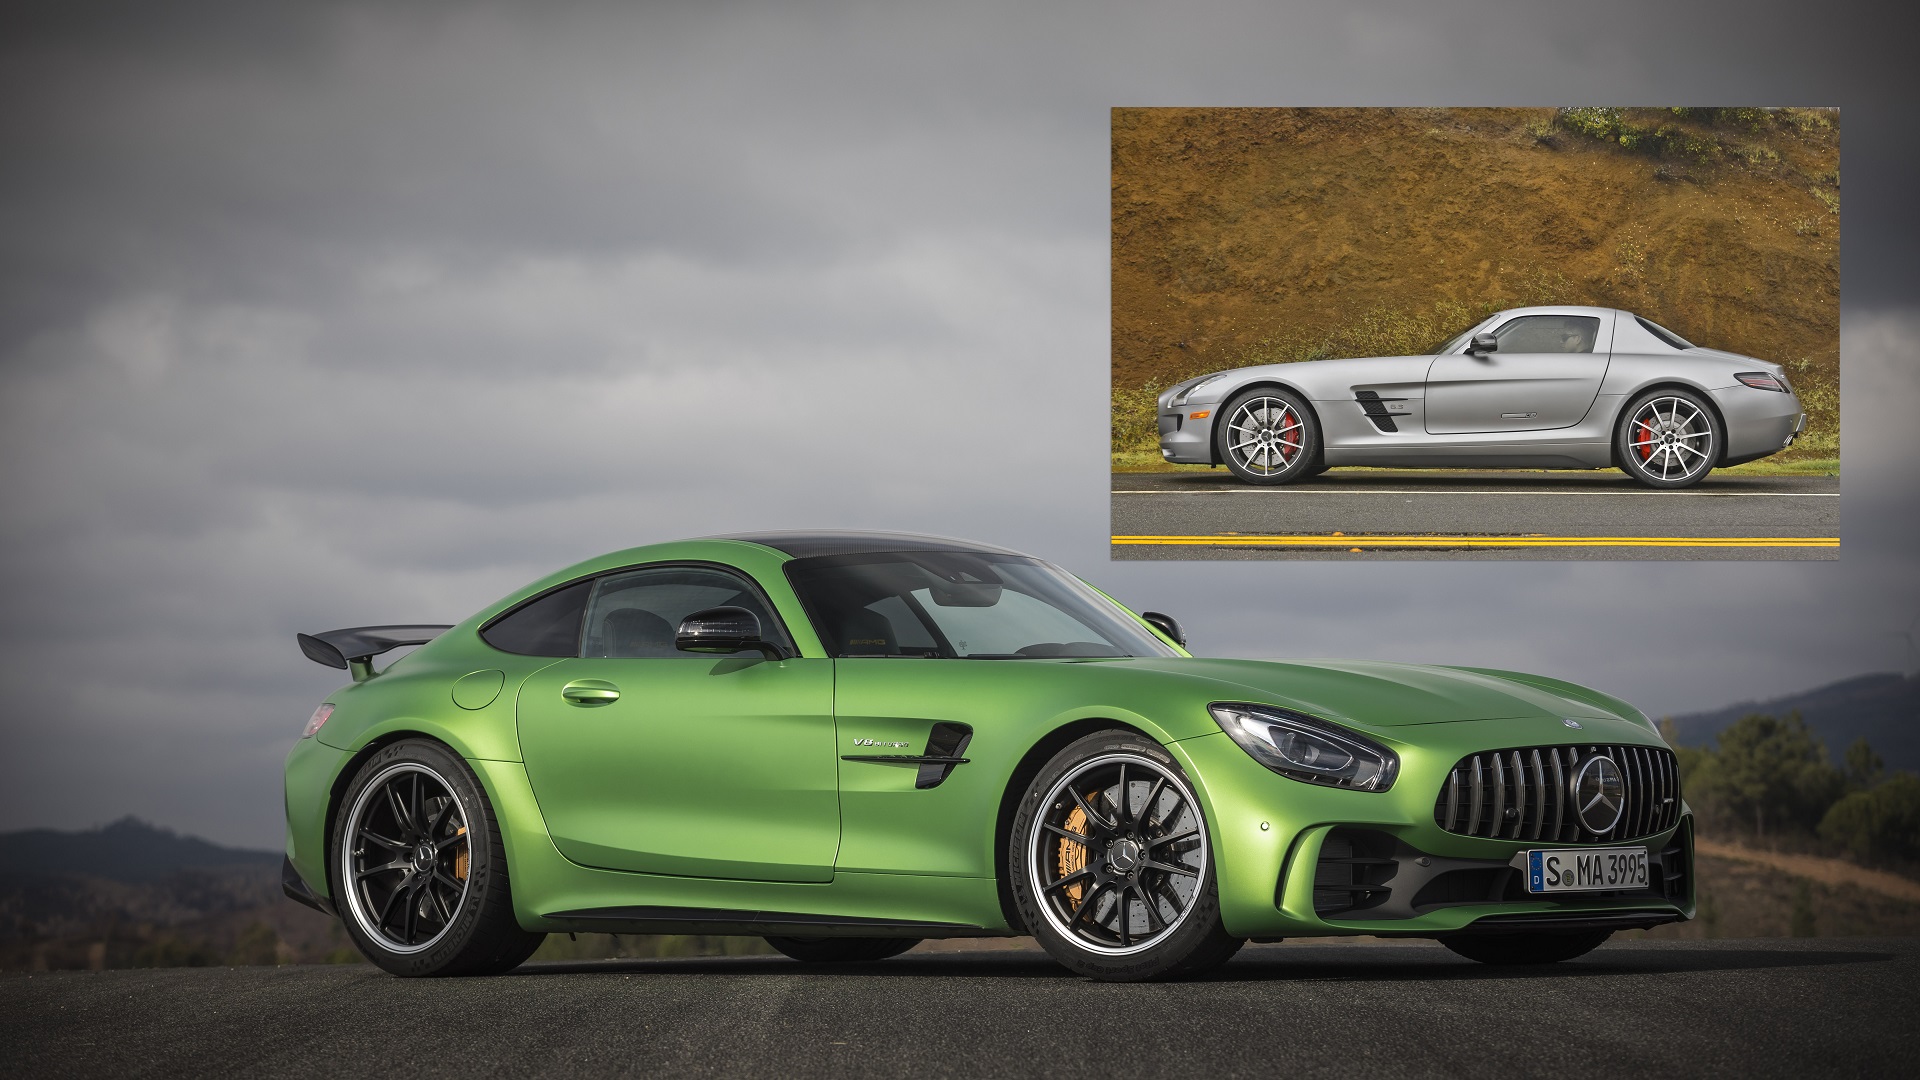 verticaal pijpleiding Arena How the Mercedes-Benz SLS AMG evolved into the Mercedes-AMG GT